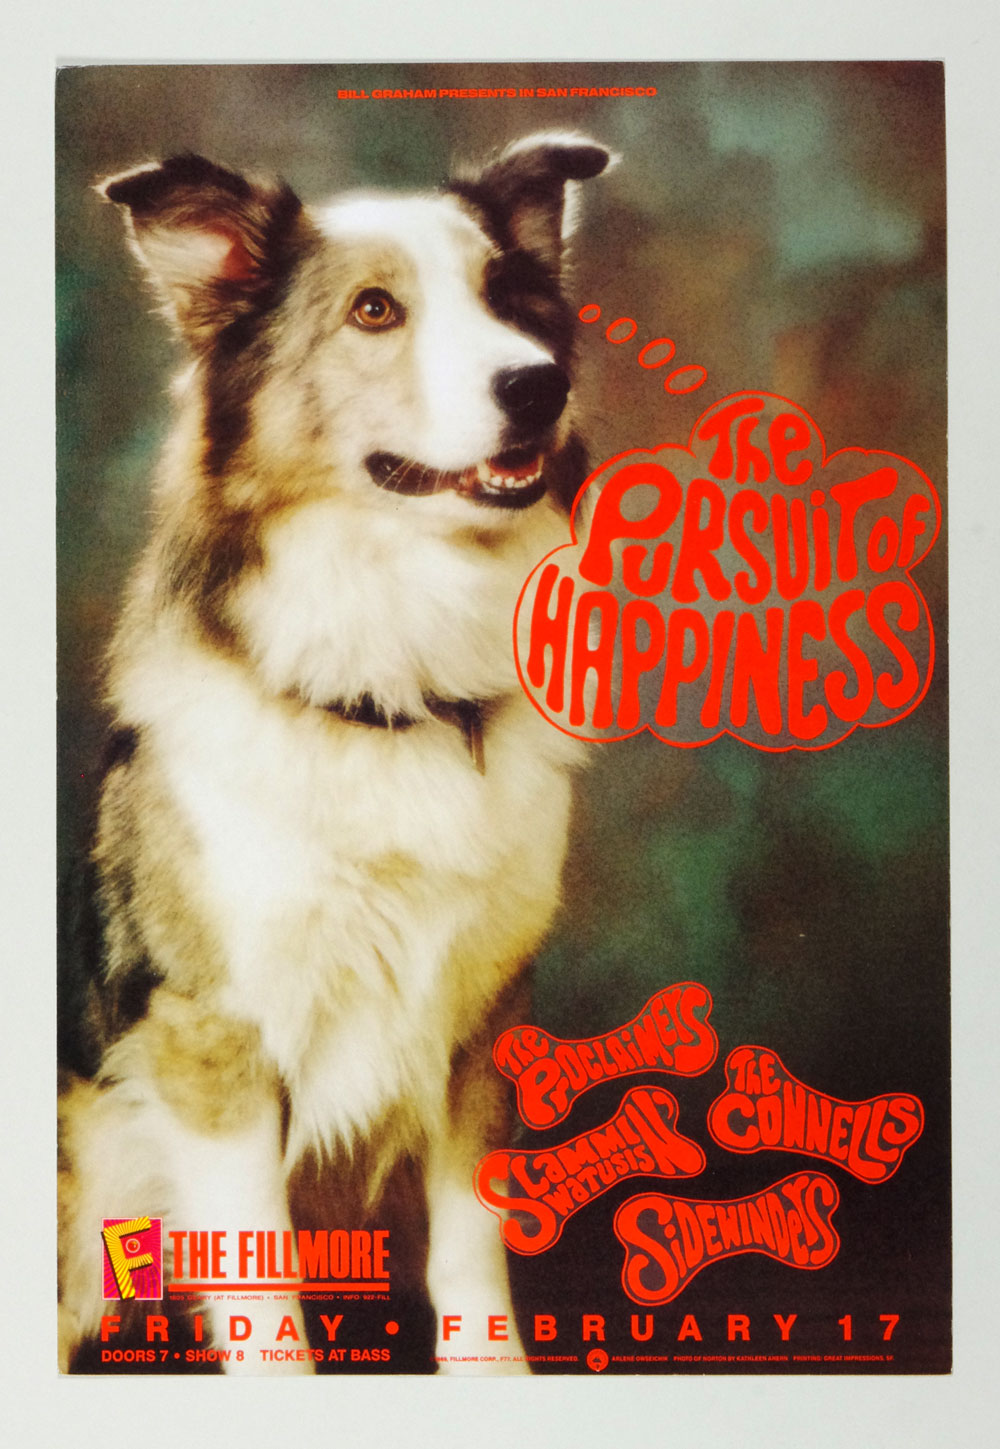 Pursuit of Happiness Poster w/ Proclaimers 1989 February 17 New Fillmore San Francisco